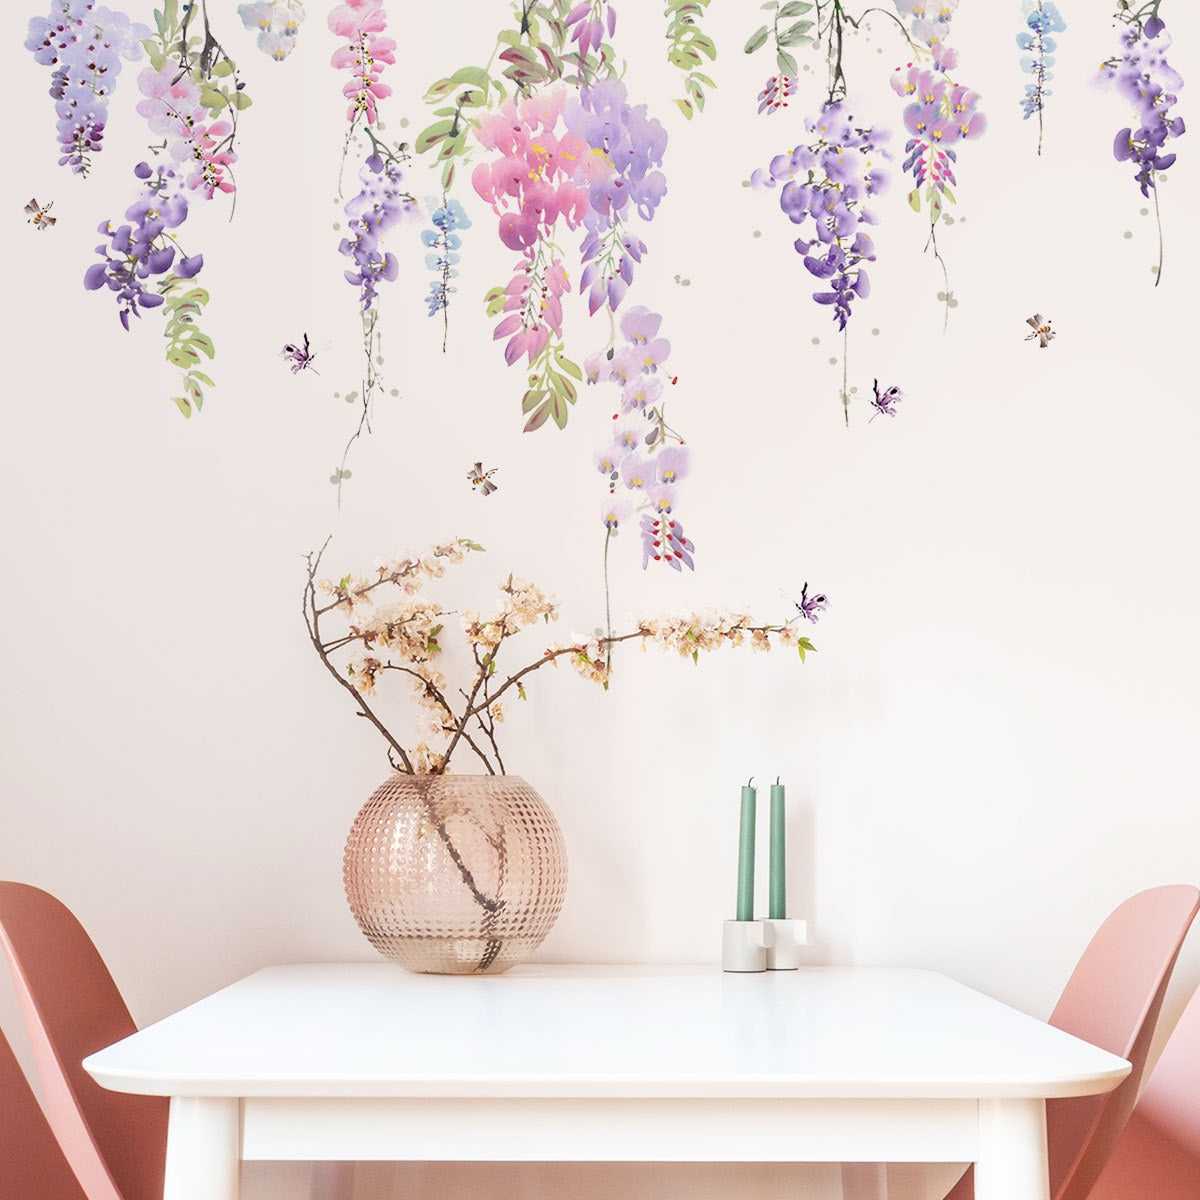 Flower Plants Floral Wall Stickers